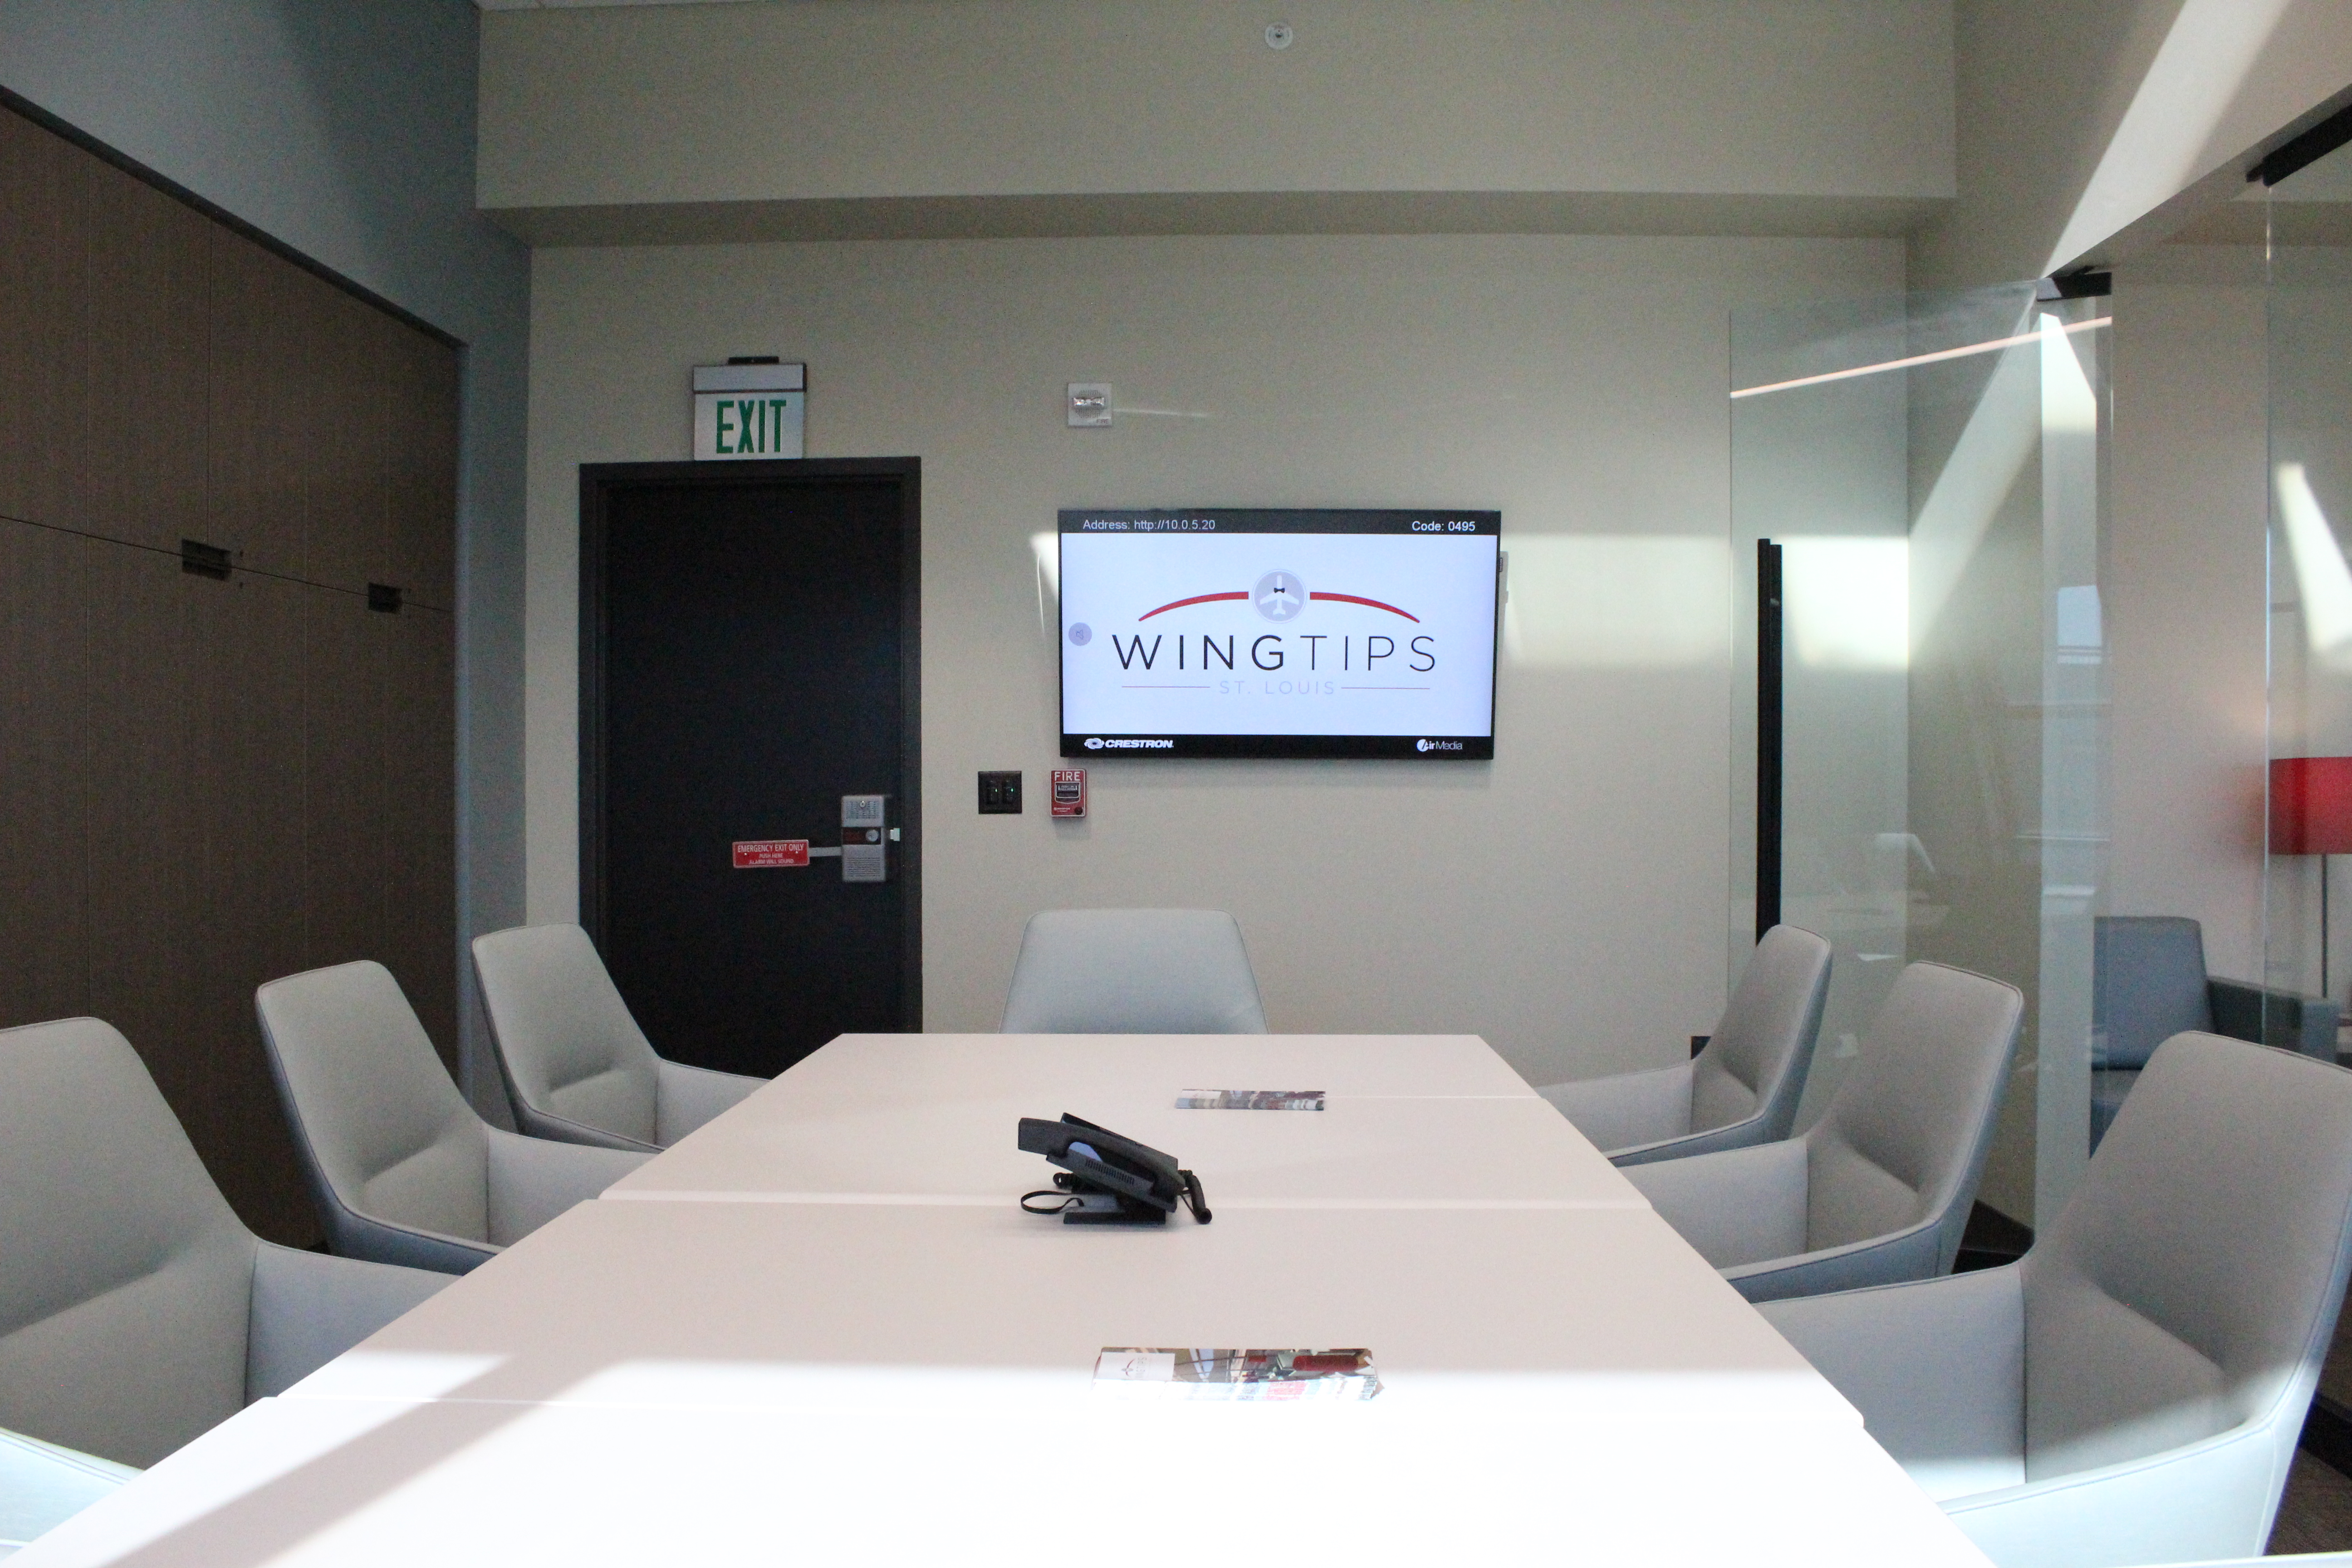 Conference seating at the conference room, available for a fee at the Wingtips Lounge St. Louis